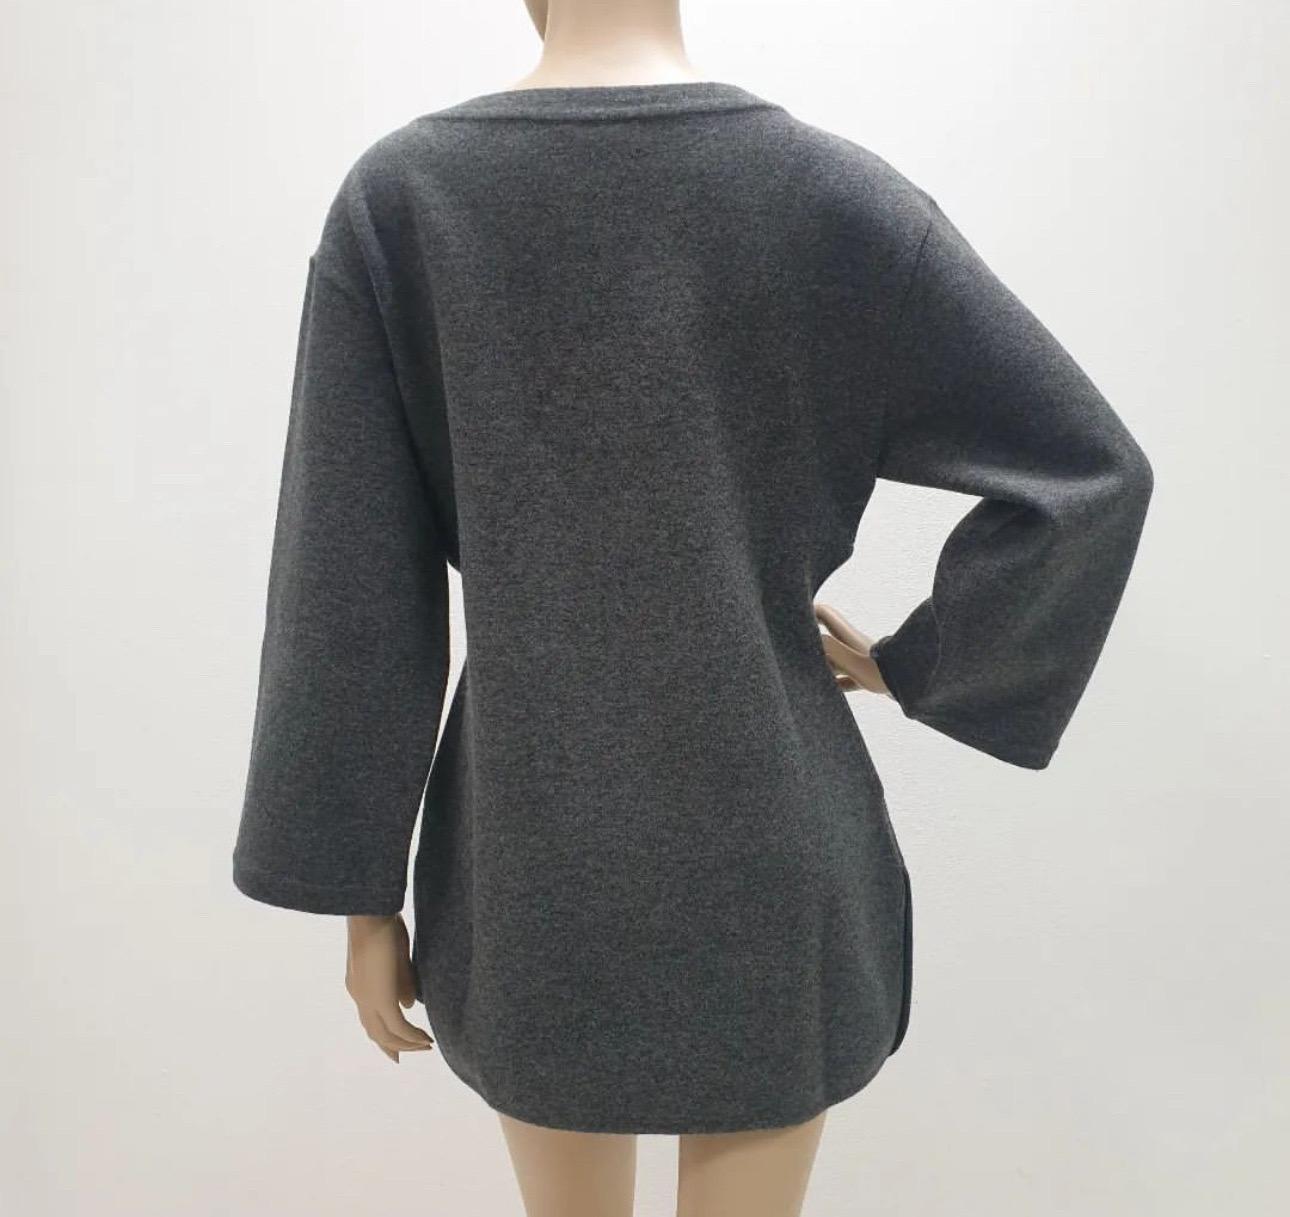 Chanel Gray Wool Tunic Sweater Tops In Excellent Condition For Sale In Krakow, PL